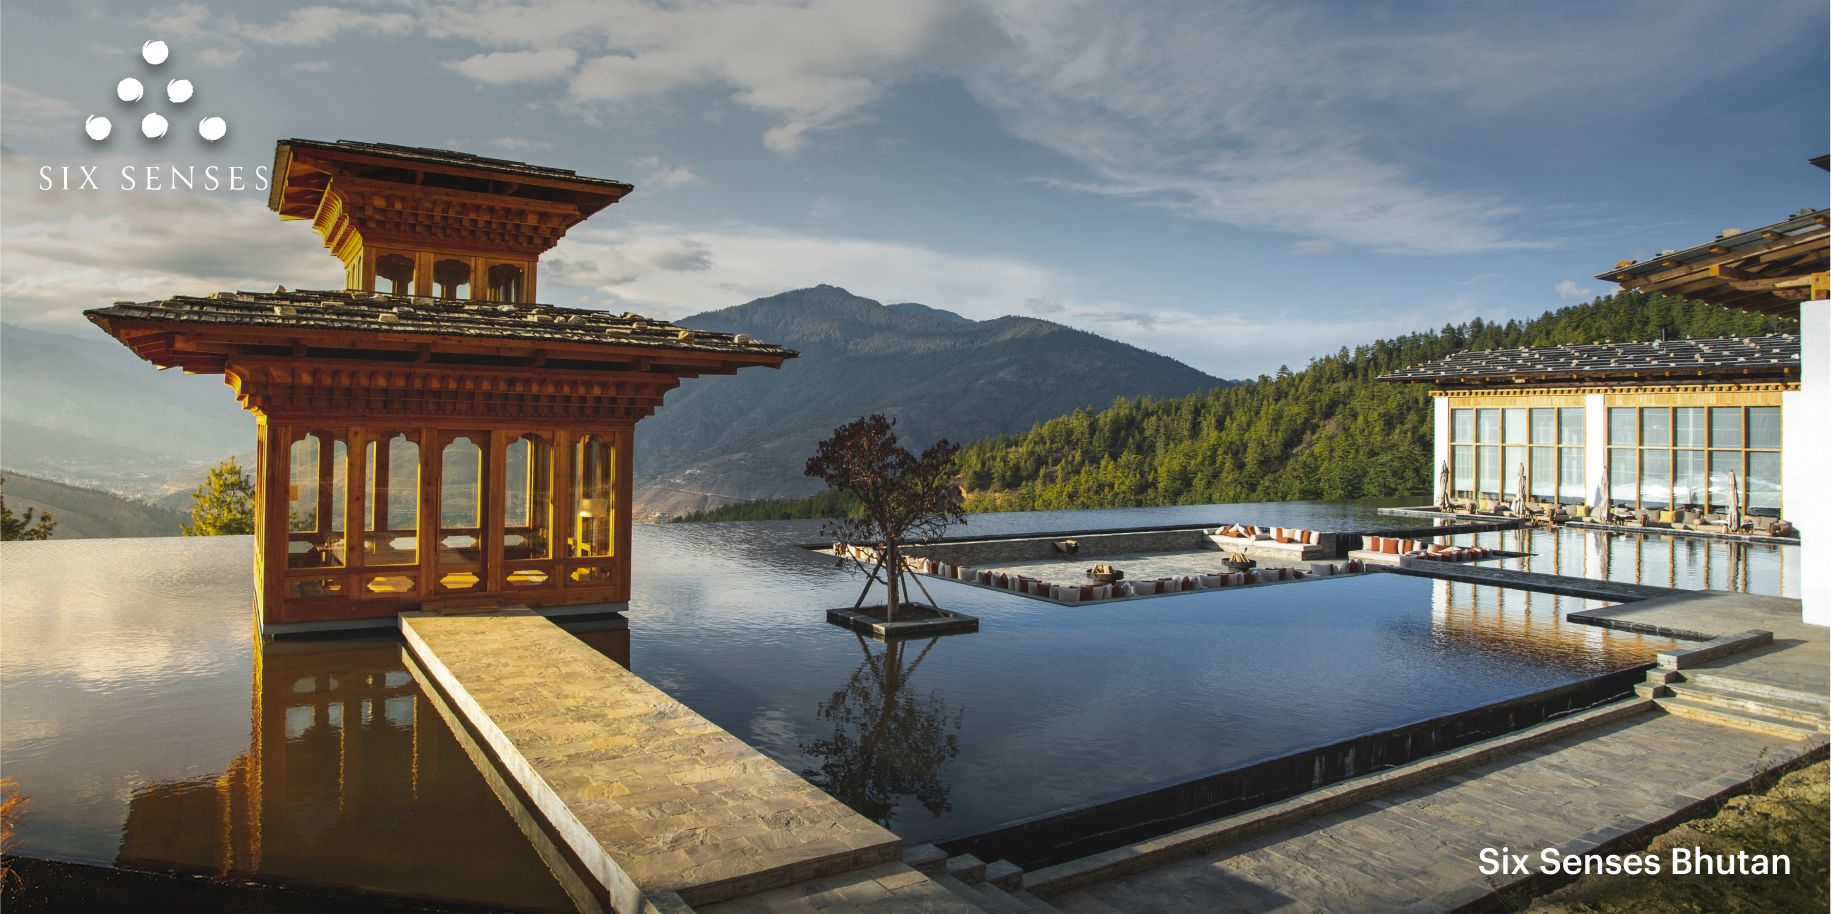 A serene view of the Six Senses Thimphu’s mesmerizing spa experience, featuring an infinity pool set against a backdrop of rolling green mountains.